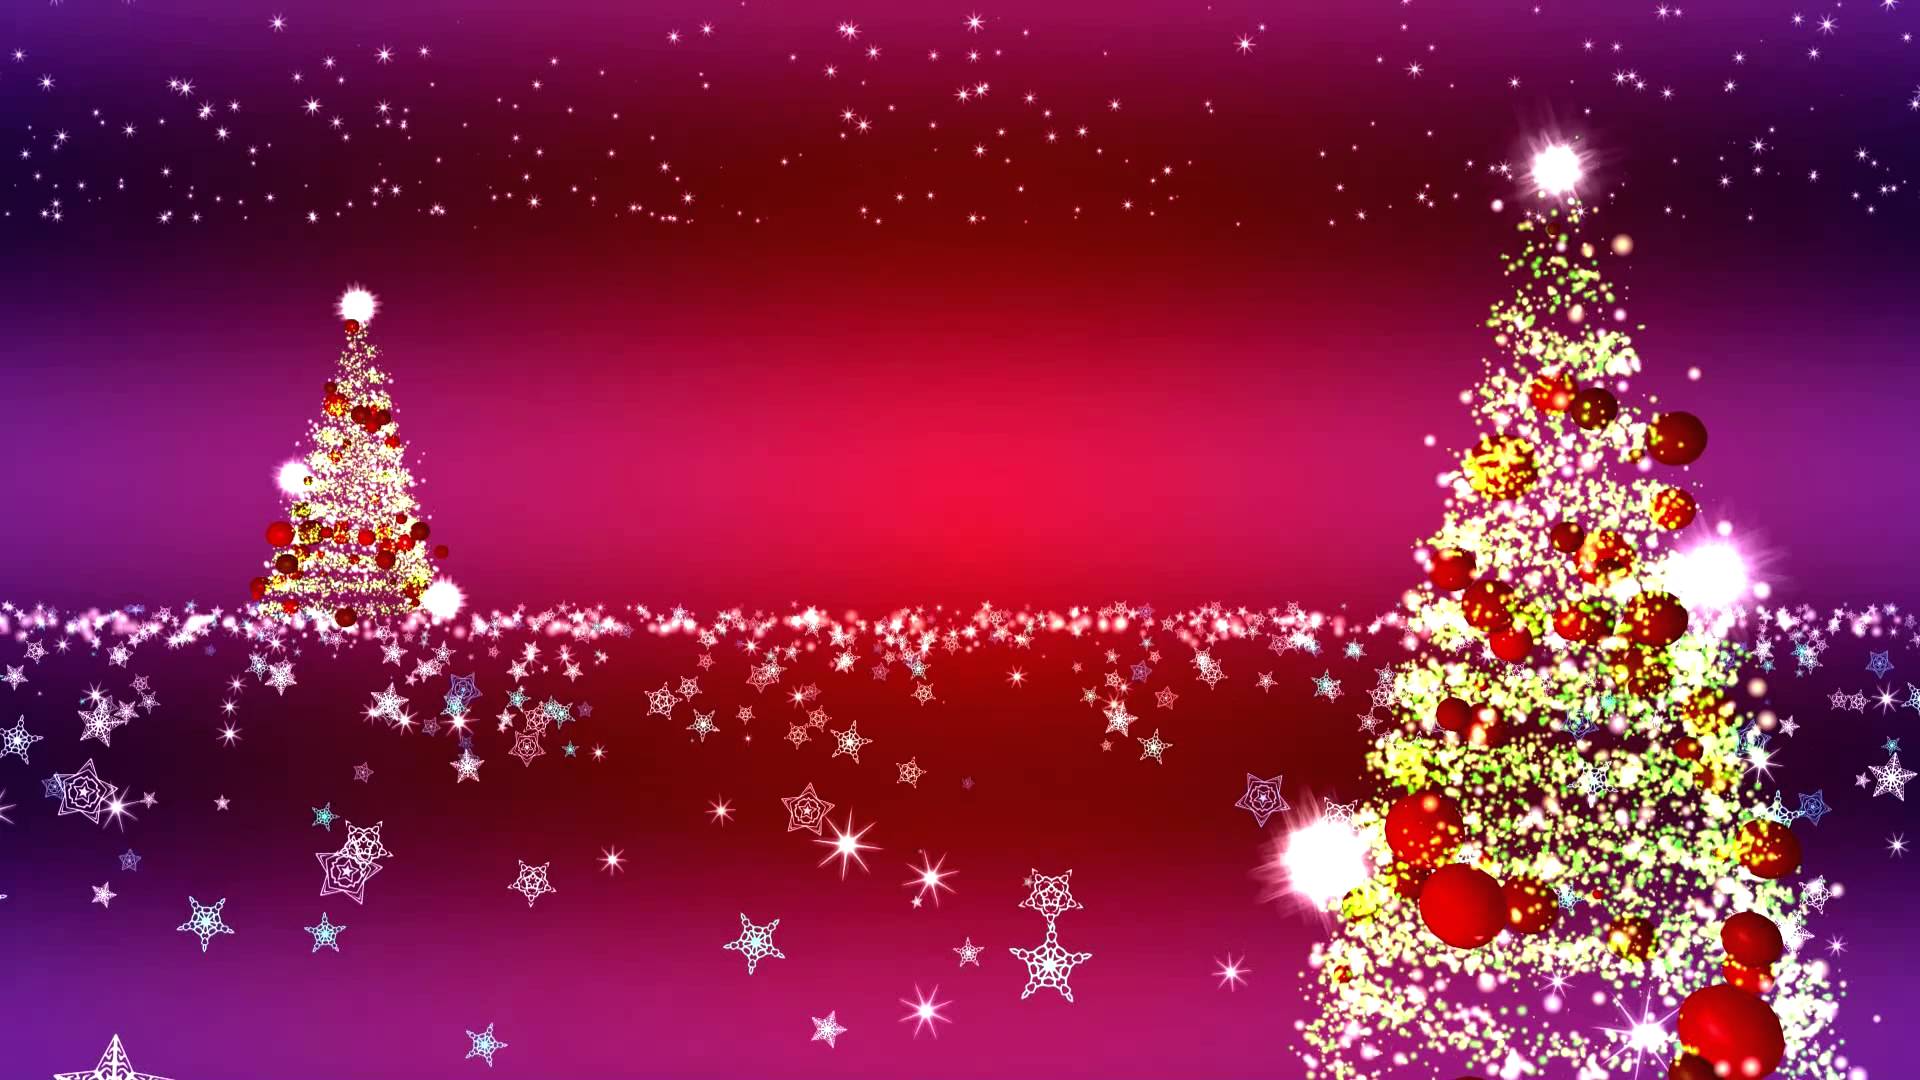 Christmas Background HD Wallpaper Image Photos